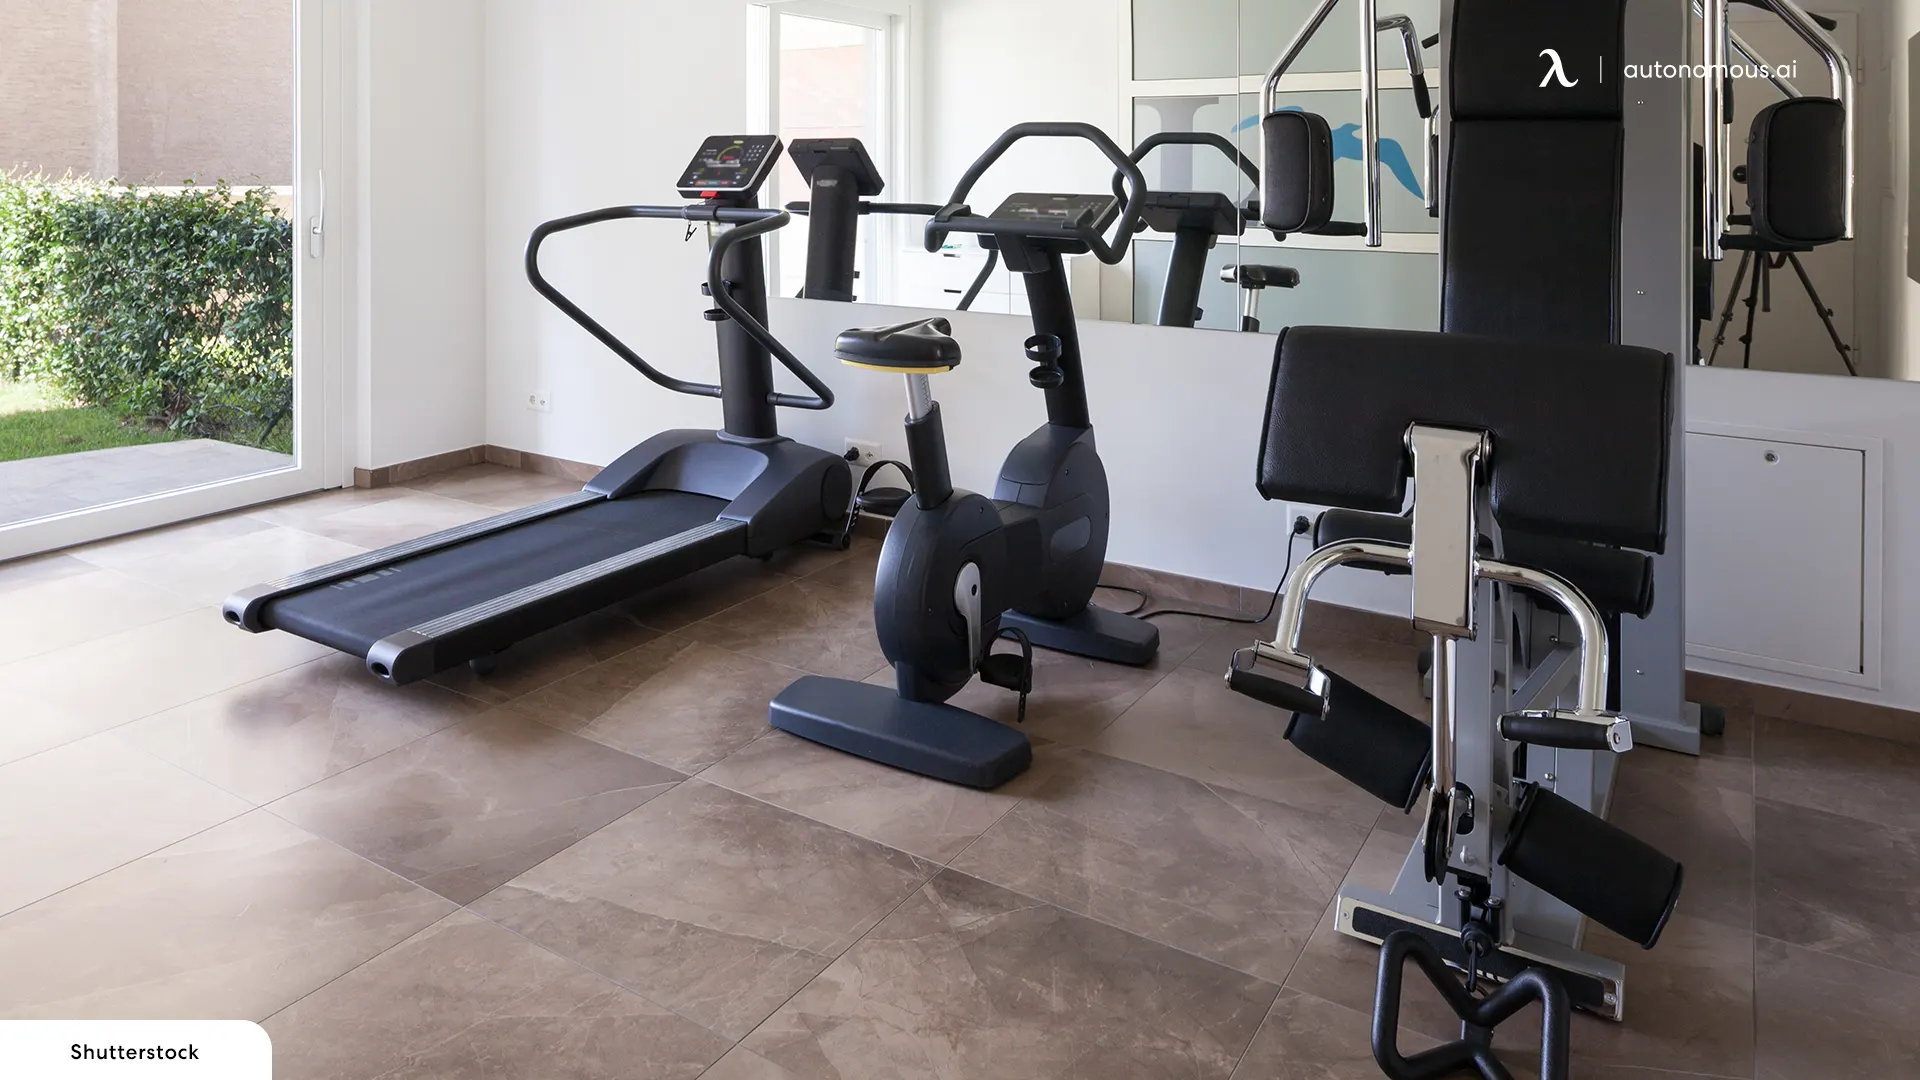 What Is The Best Way To Start Building A Perfect Home Gym?